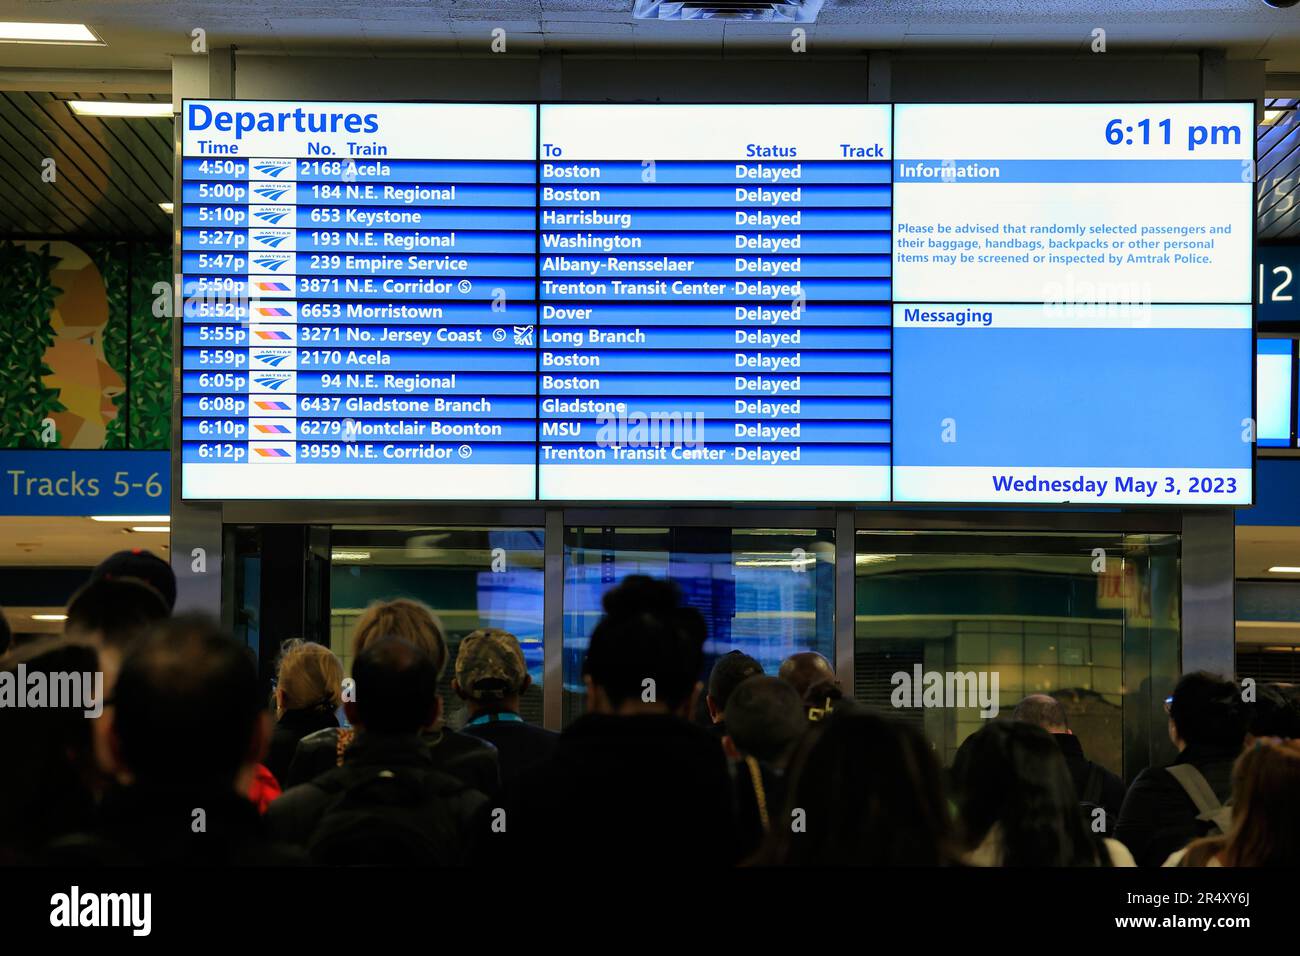 Rush hour commuters wait by a train departure board at Penn Station, New York, as trains are delayed for hours due to police activity, May 3, 2023. Stock Photo